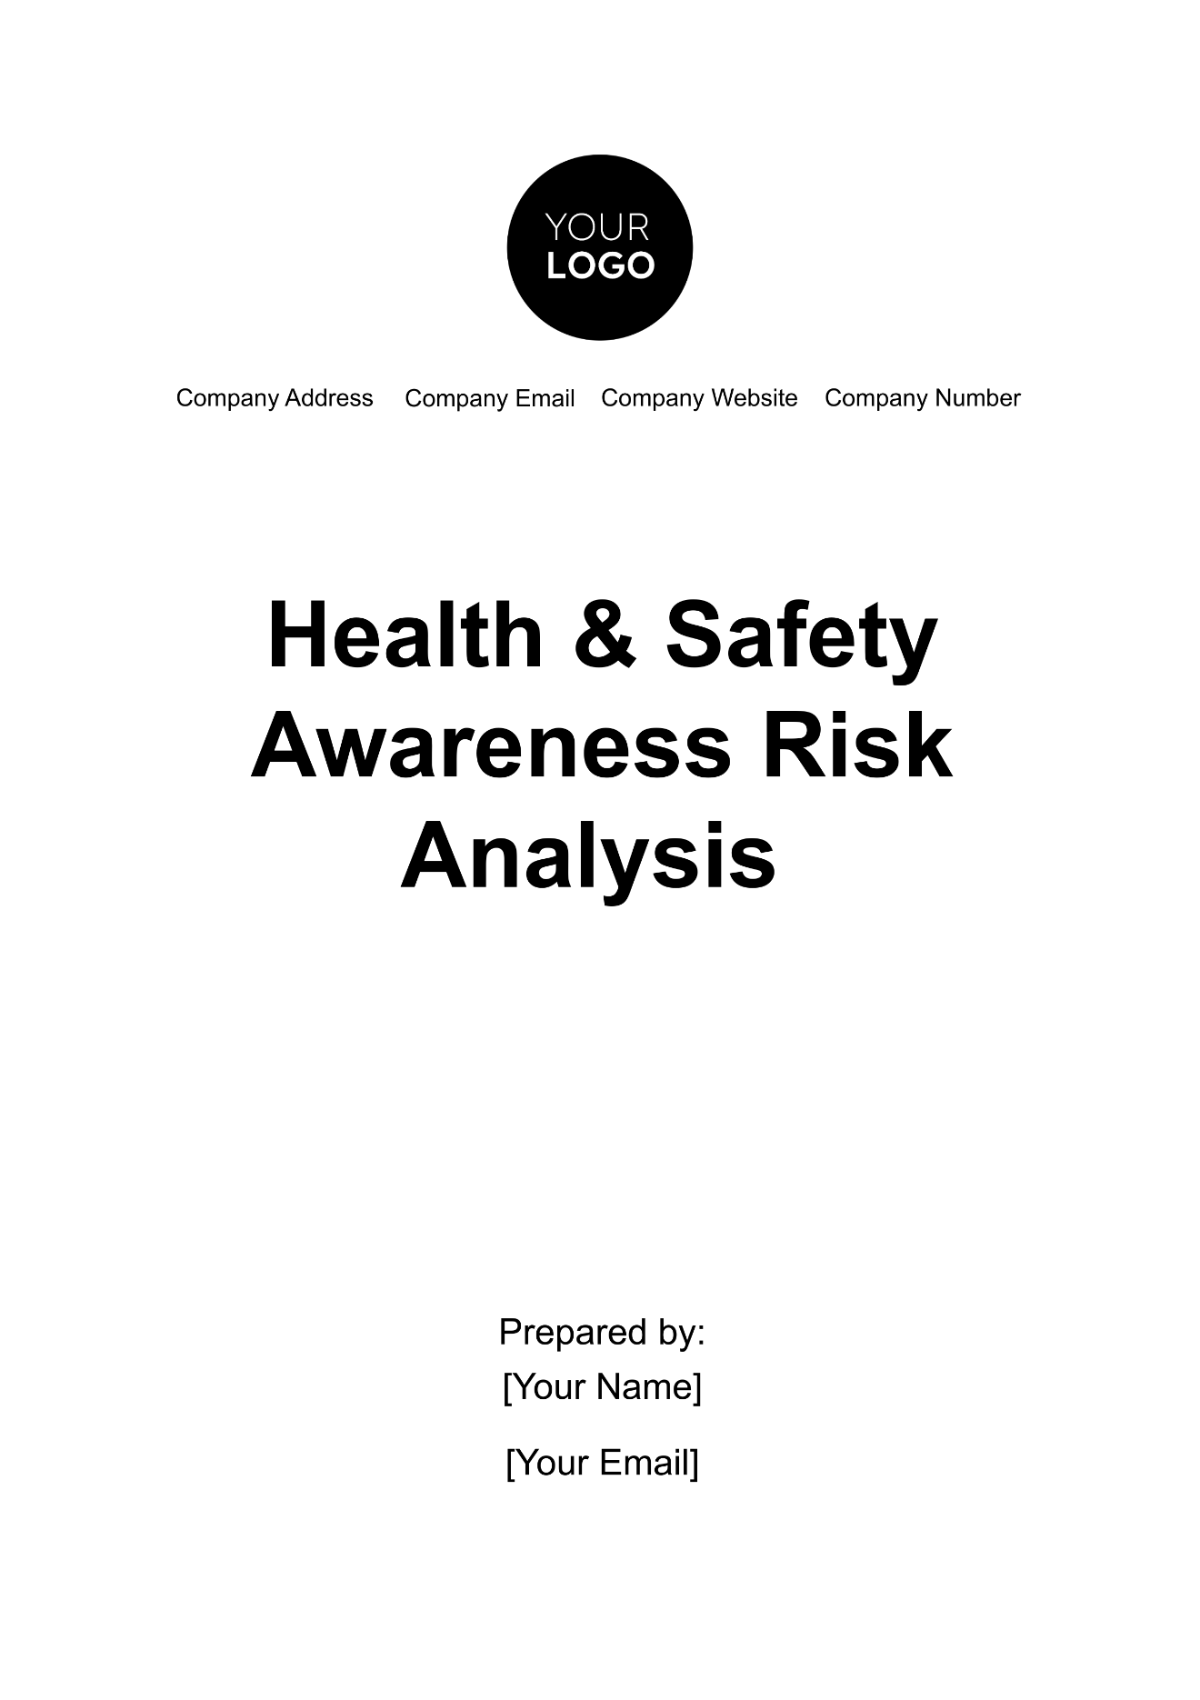 Free Health & Safety Awareness Risk Analysis Template